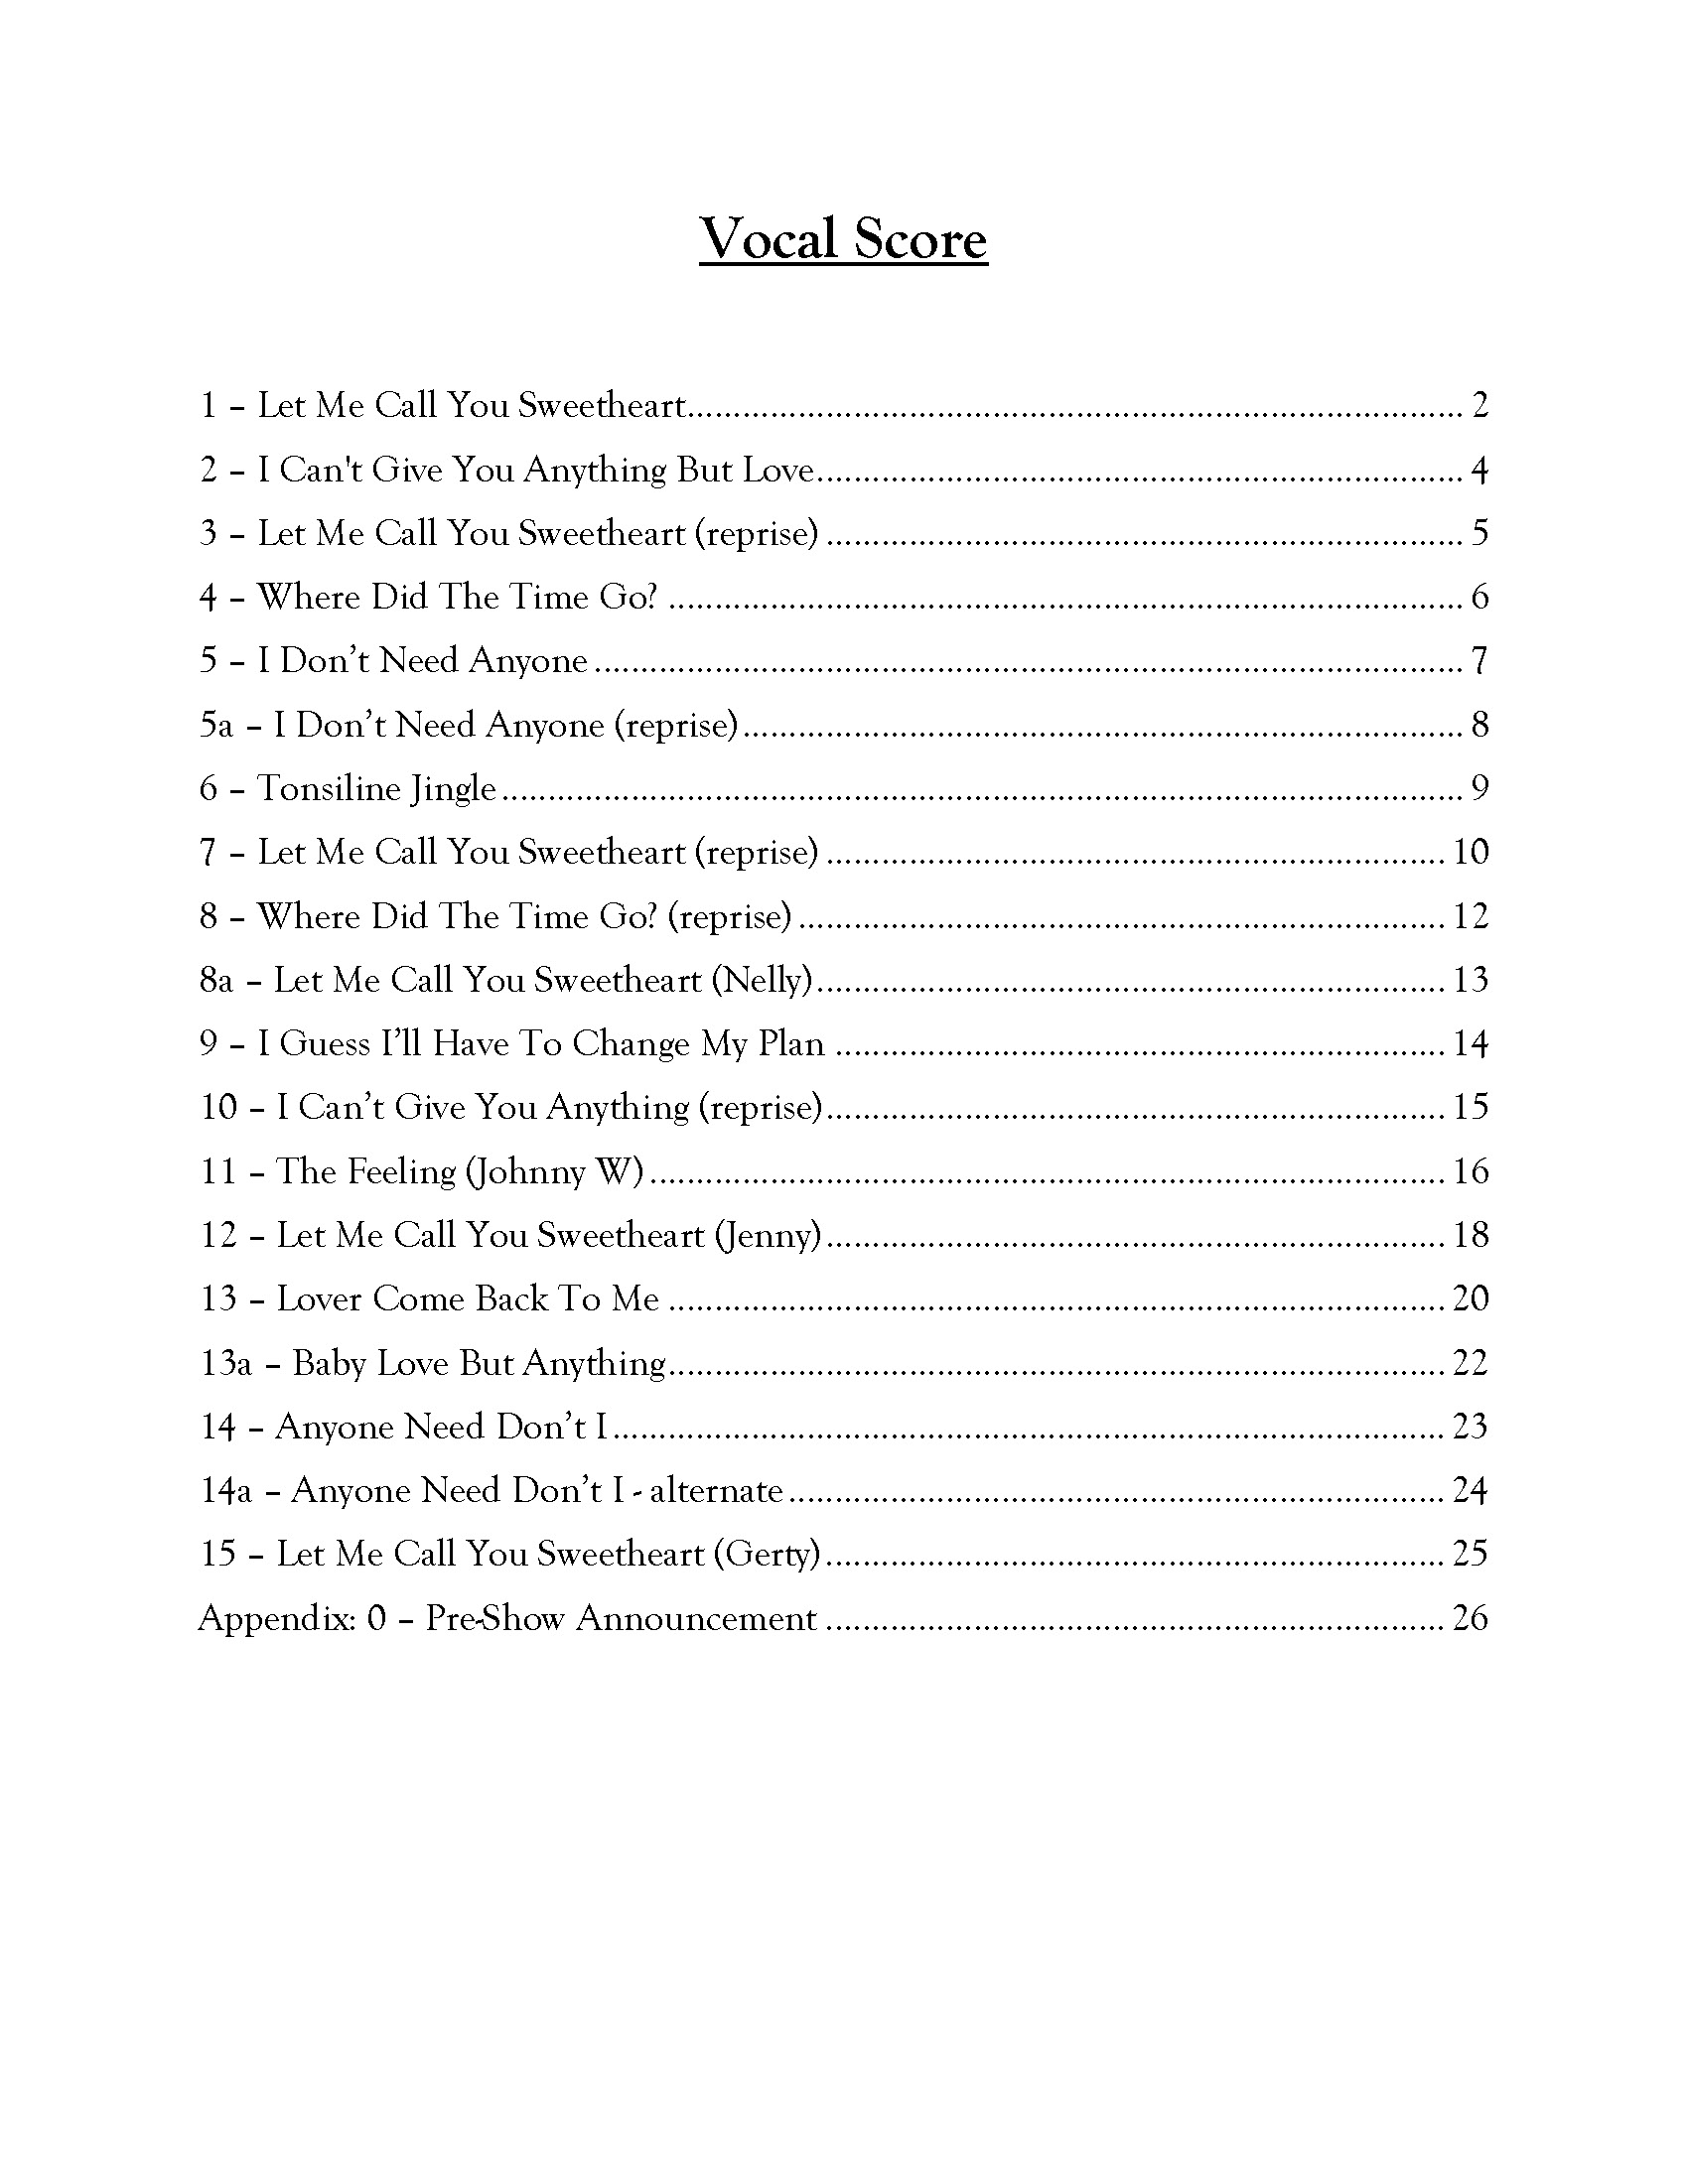 Failure A Love Story Vocal Score_Page_03.jpg